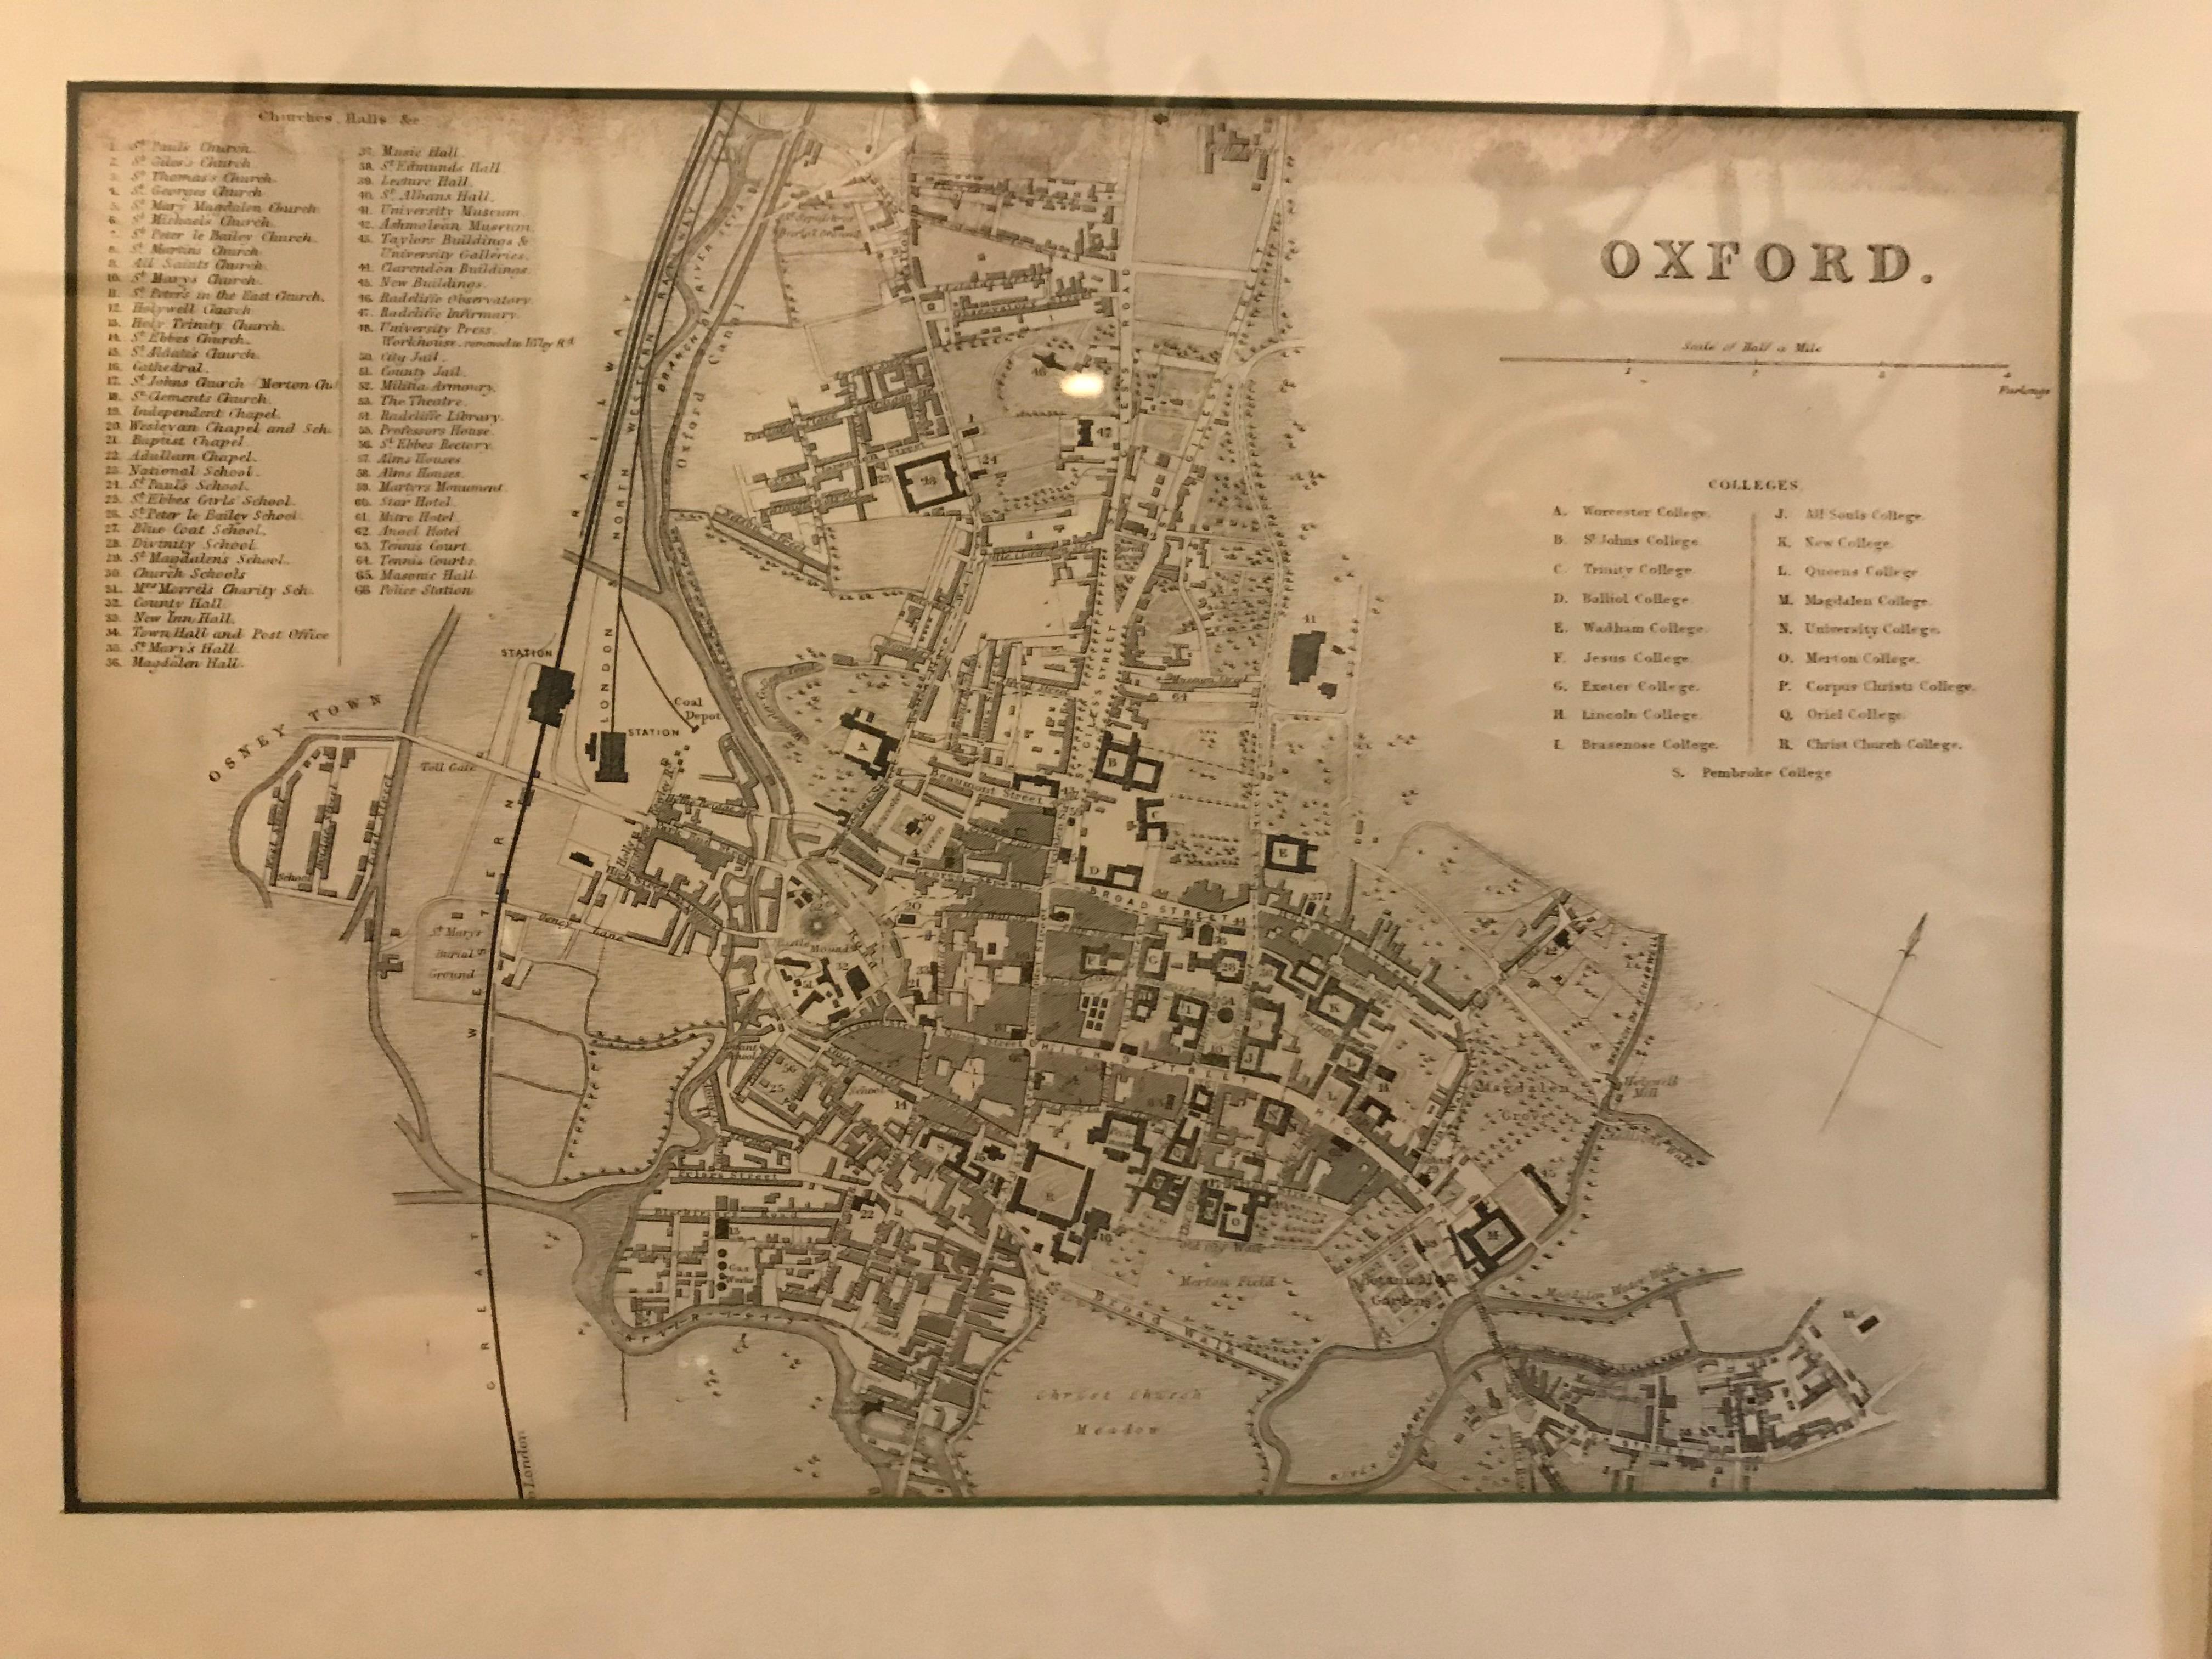 Pair of maps of Oxford and Cambridge in custom black wood frames. With beautiful hand-drawn lettering and a breathtaking commitment to detail, these mid 19th-century maps are a great example of mapmaking in the period.

England, circa